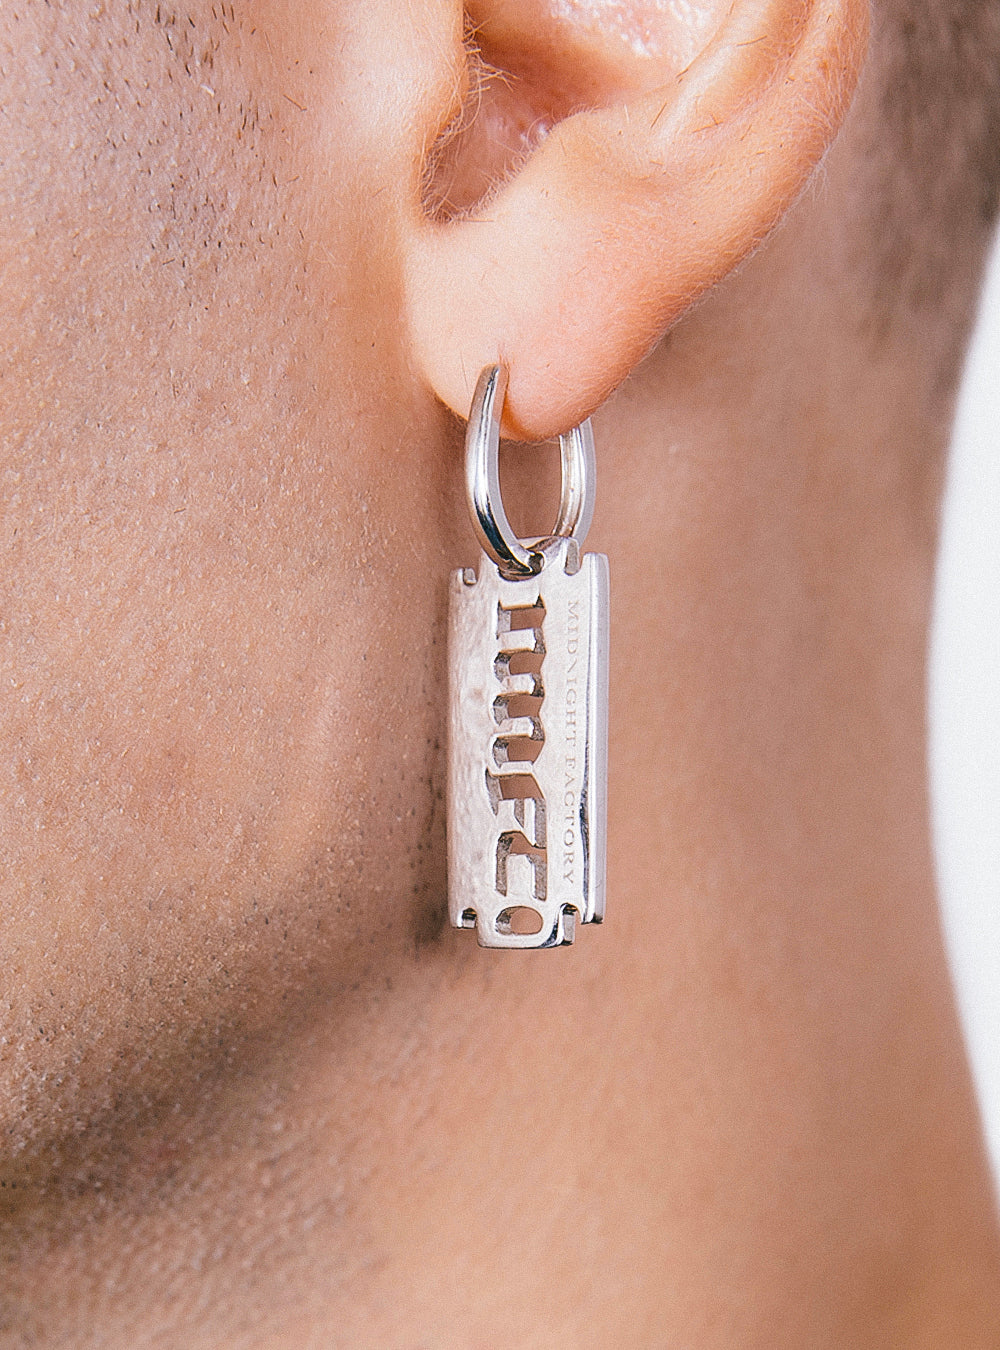 A man wearing a pair of MIDNIGHTFACTORY MNFT blade earrings.